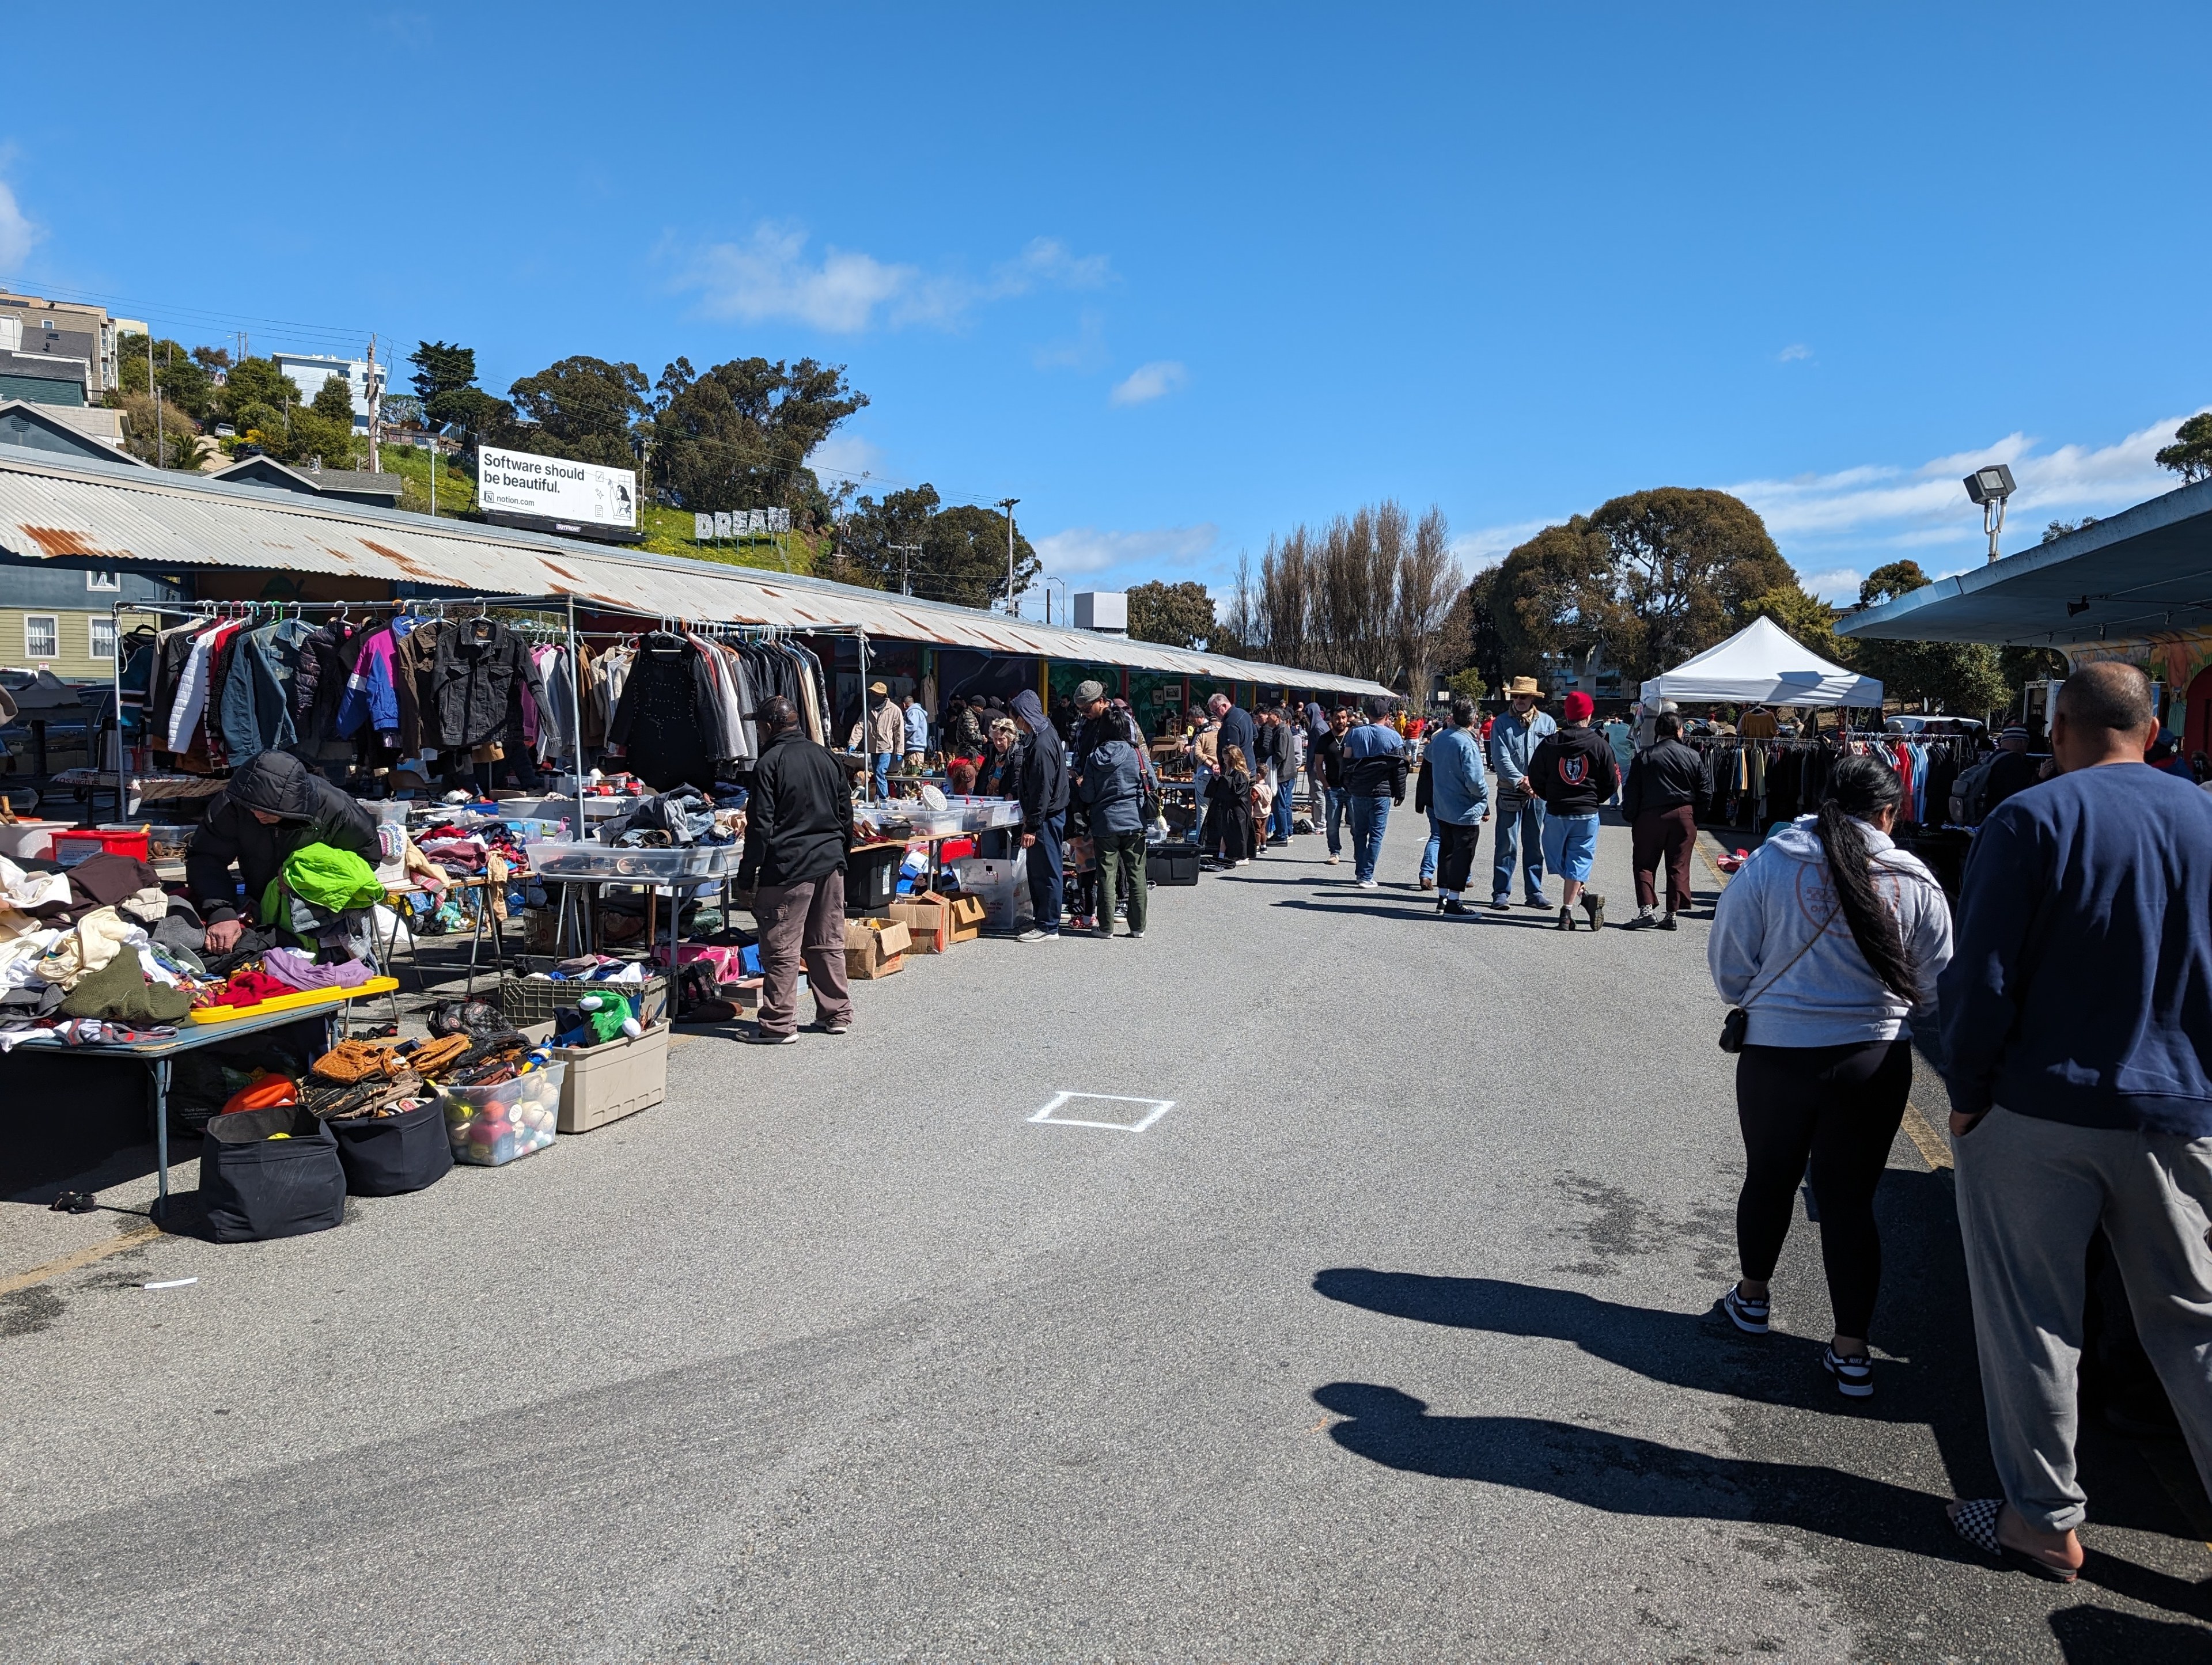 Rows of booths with baskets of clothing and goods await customers at an outdoor flea market.